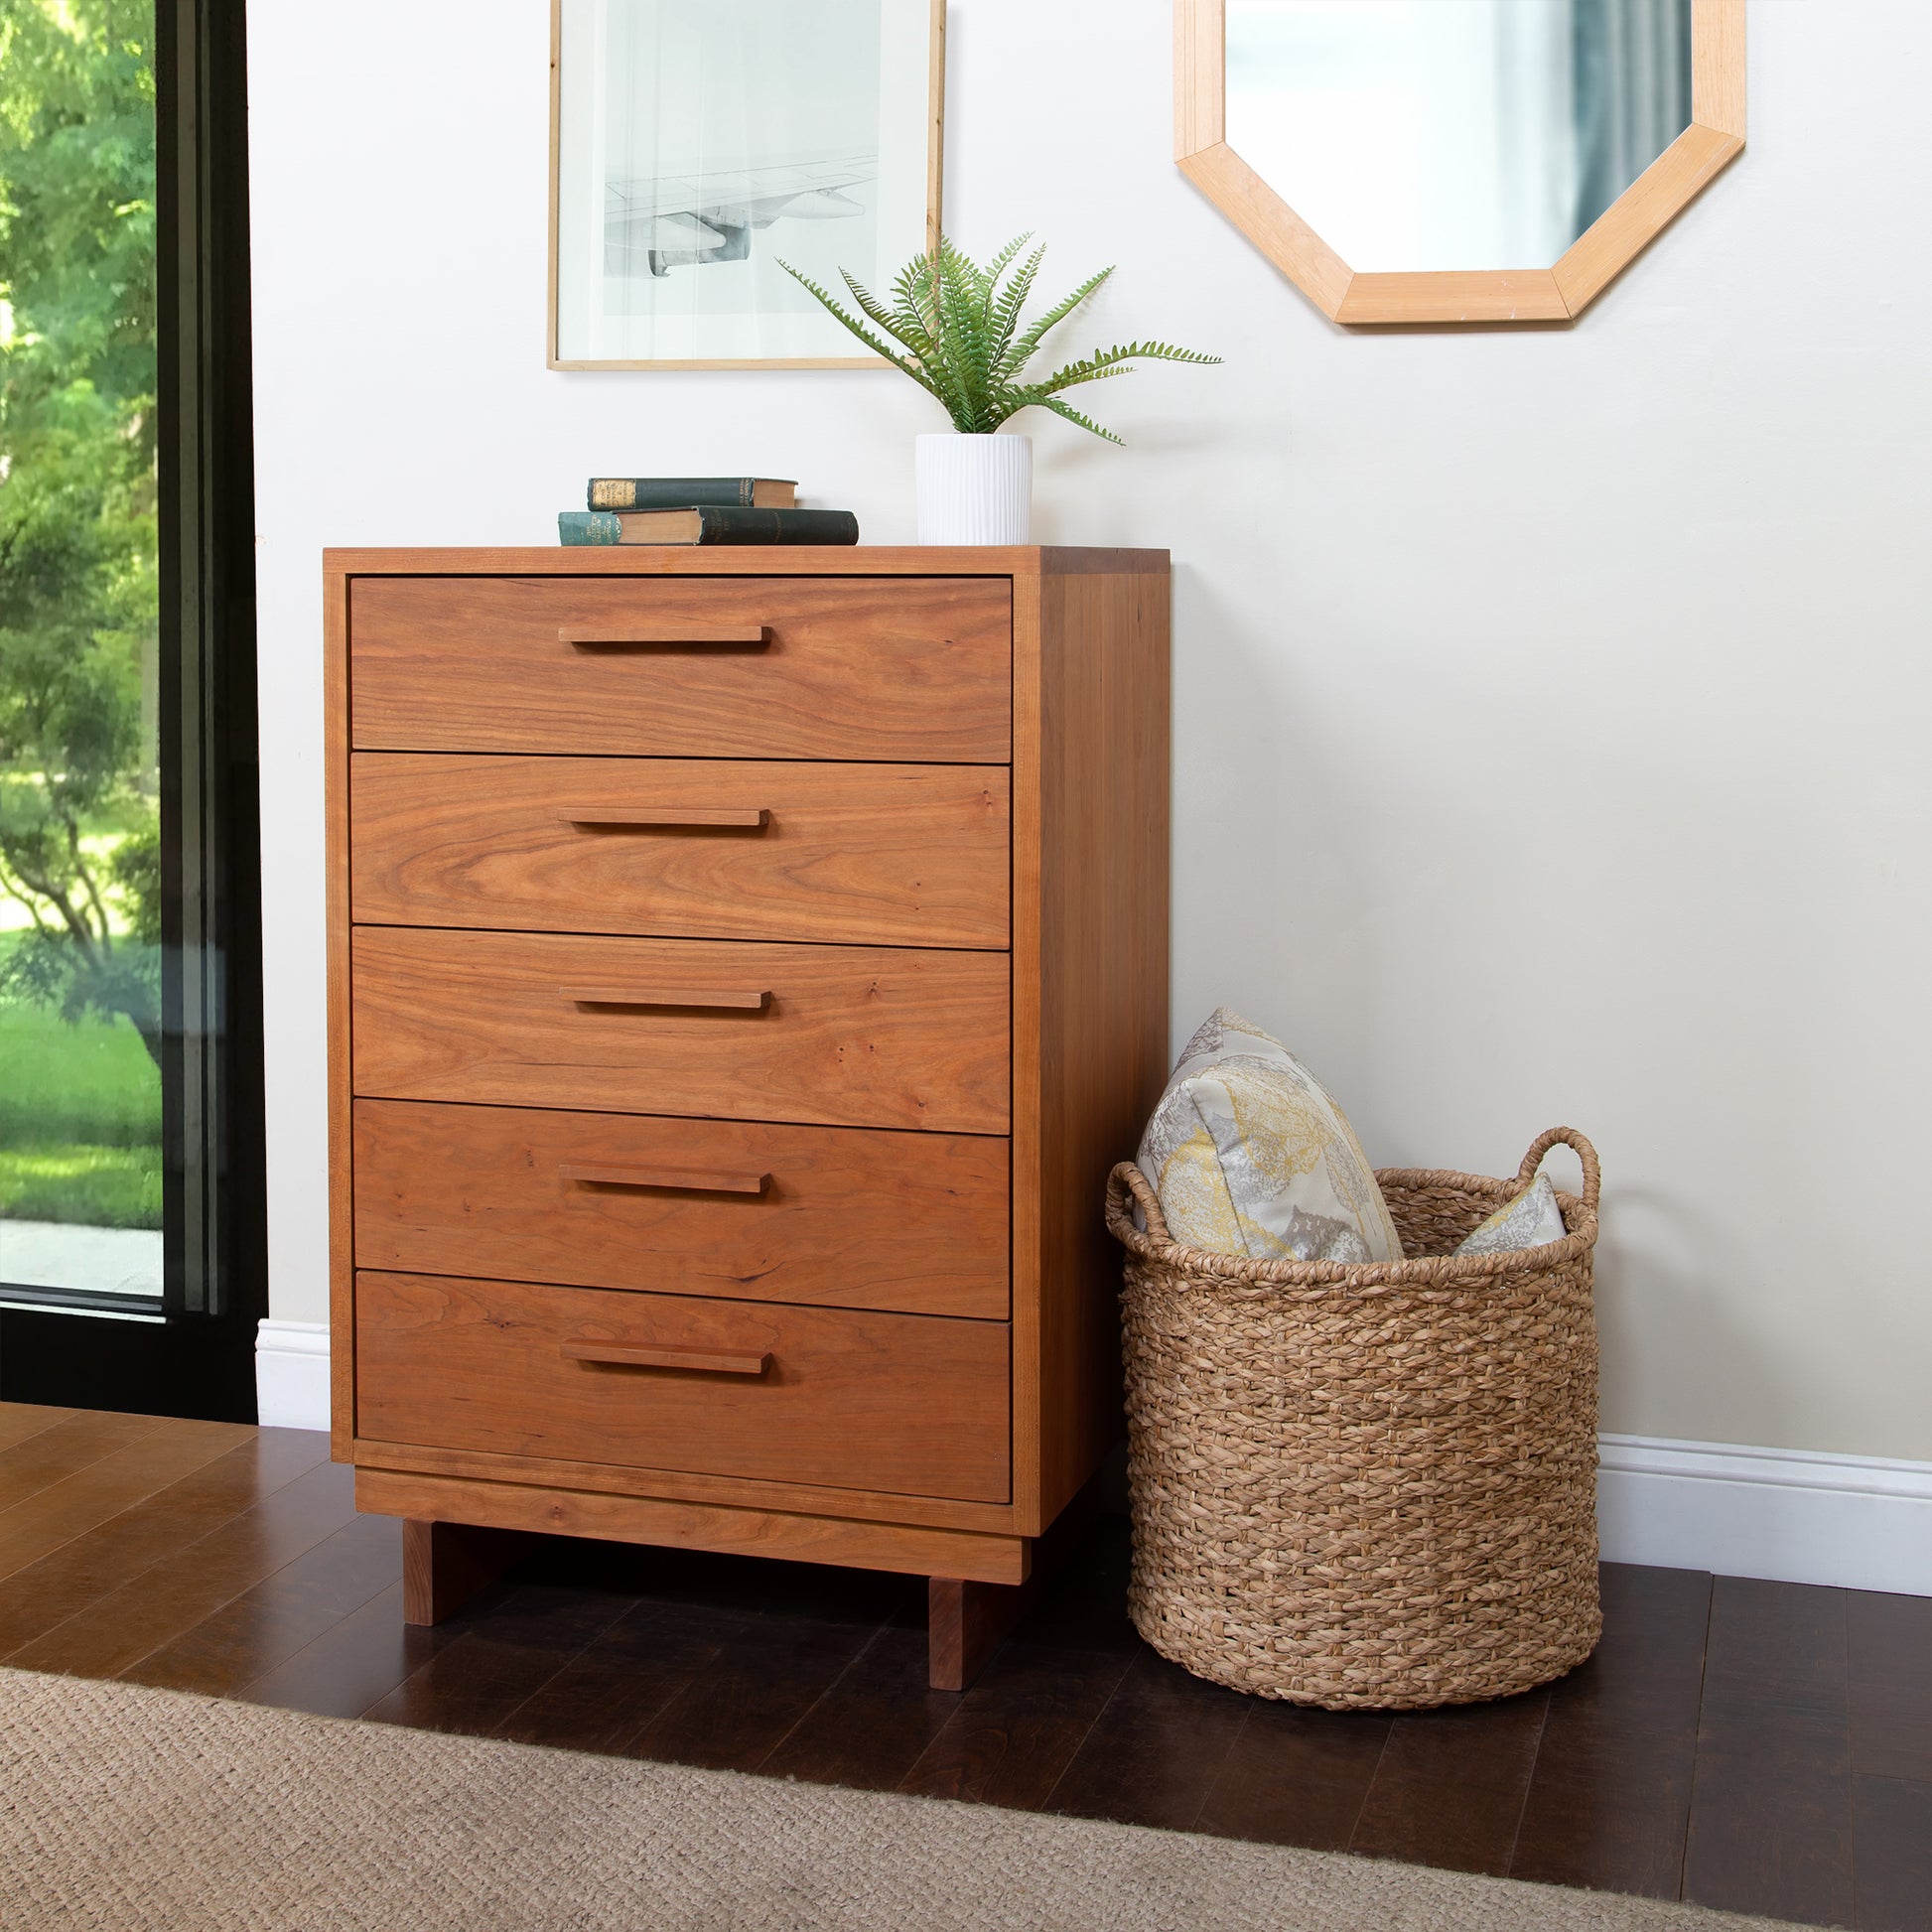 A solid hardwood Vermont Furniture Designs Loft 5-Drawer Chest stands next to a large window, with a woven basket containing pillows placed alongside it. On top of the chest, there is a small plant and a stack